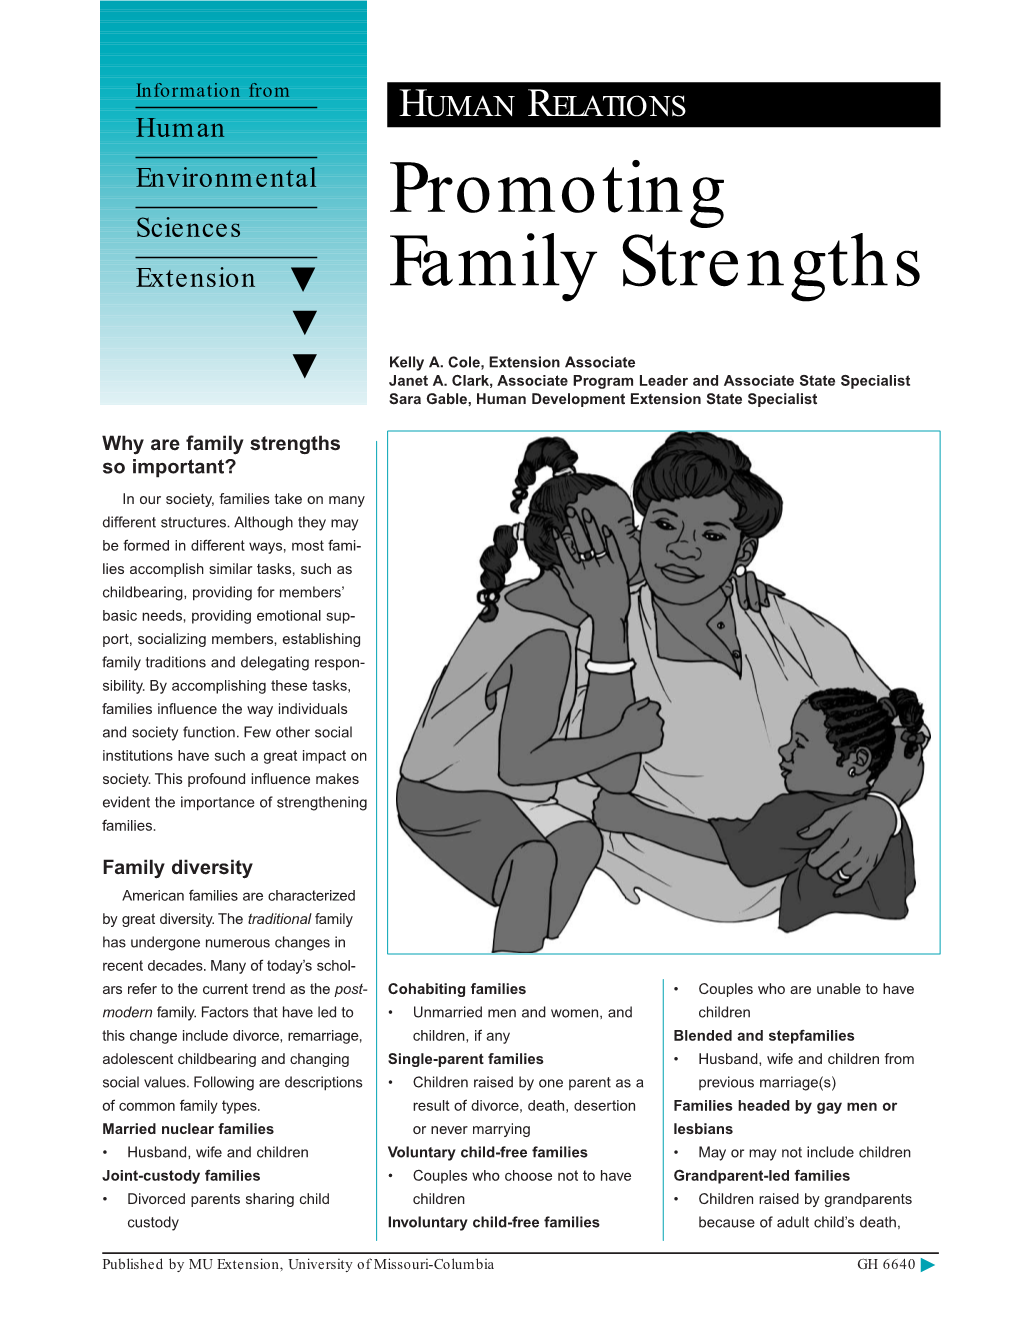 Promoting Family Strengths